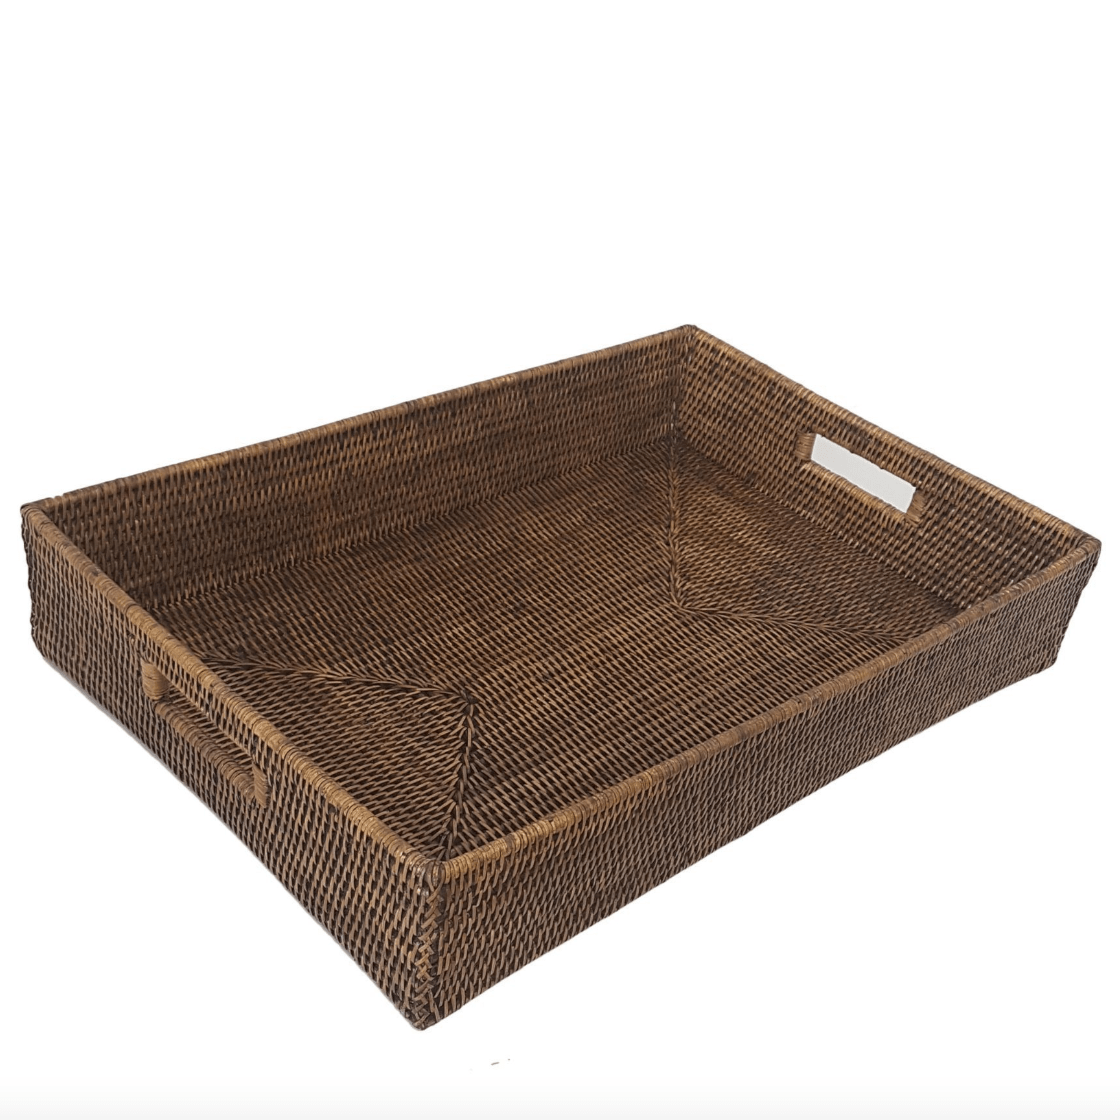 A rattan tray with tall sides and a hand slot on two side.